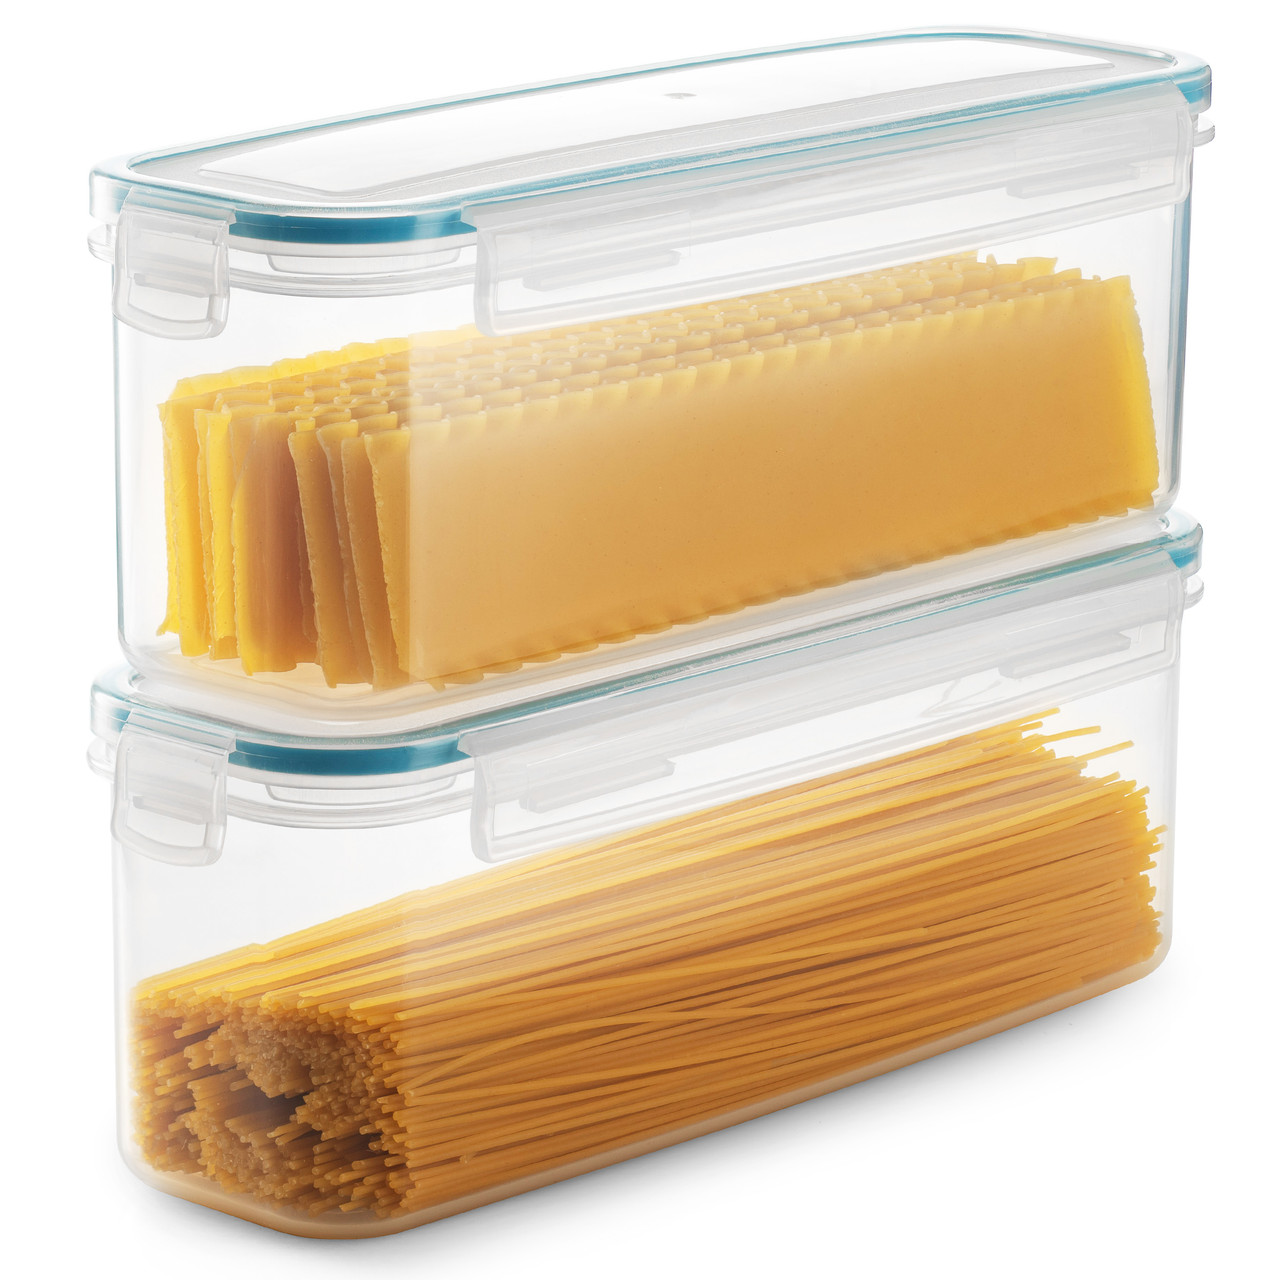 https://www.momjunction.com/wp-content/uploads/product-images/komax-biokips-pasta-storage-containers_afl453.jpg